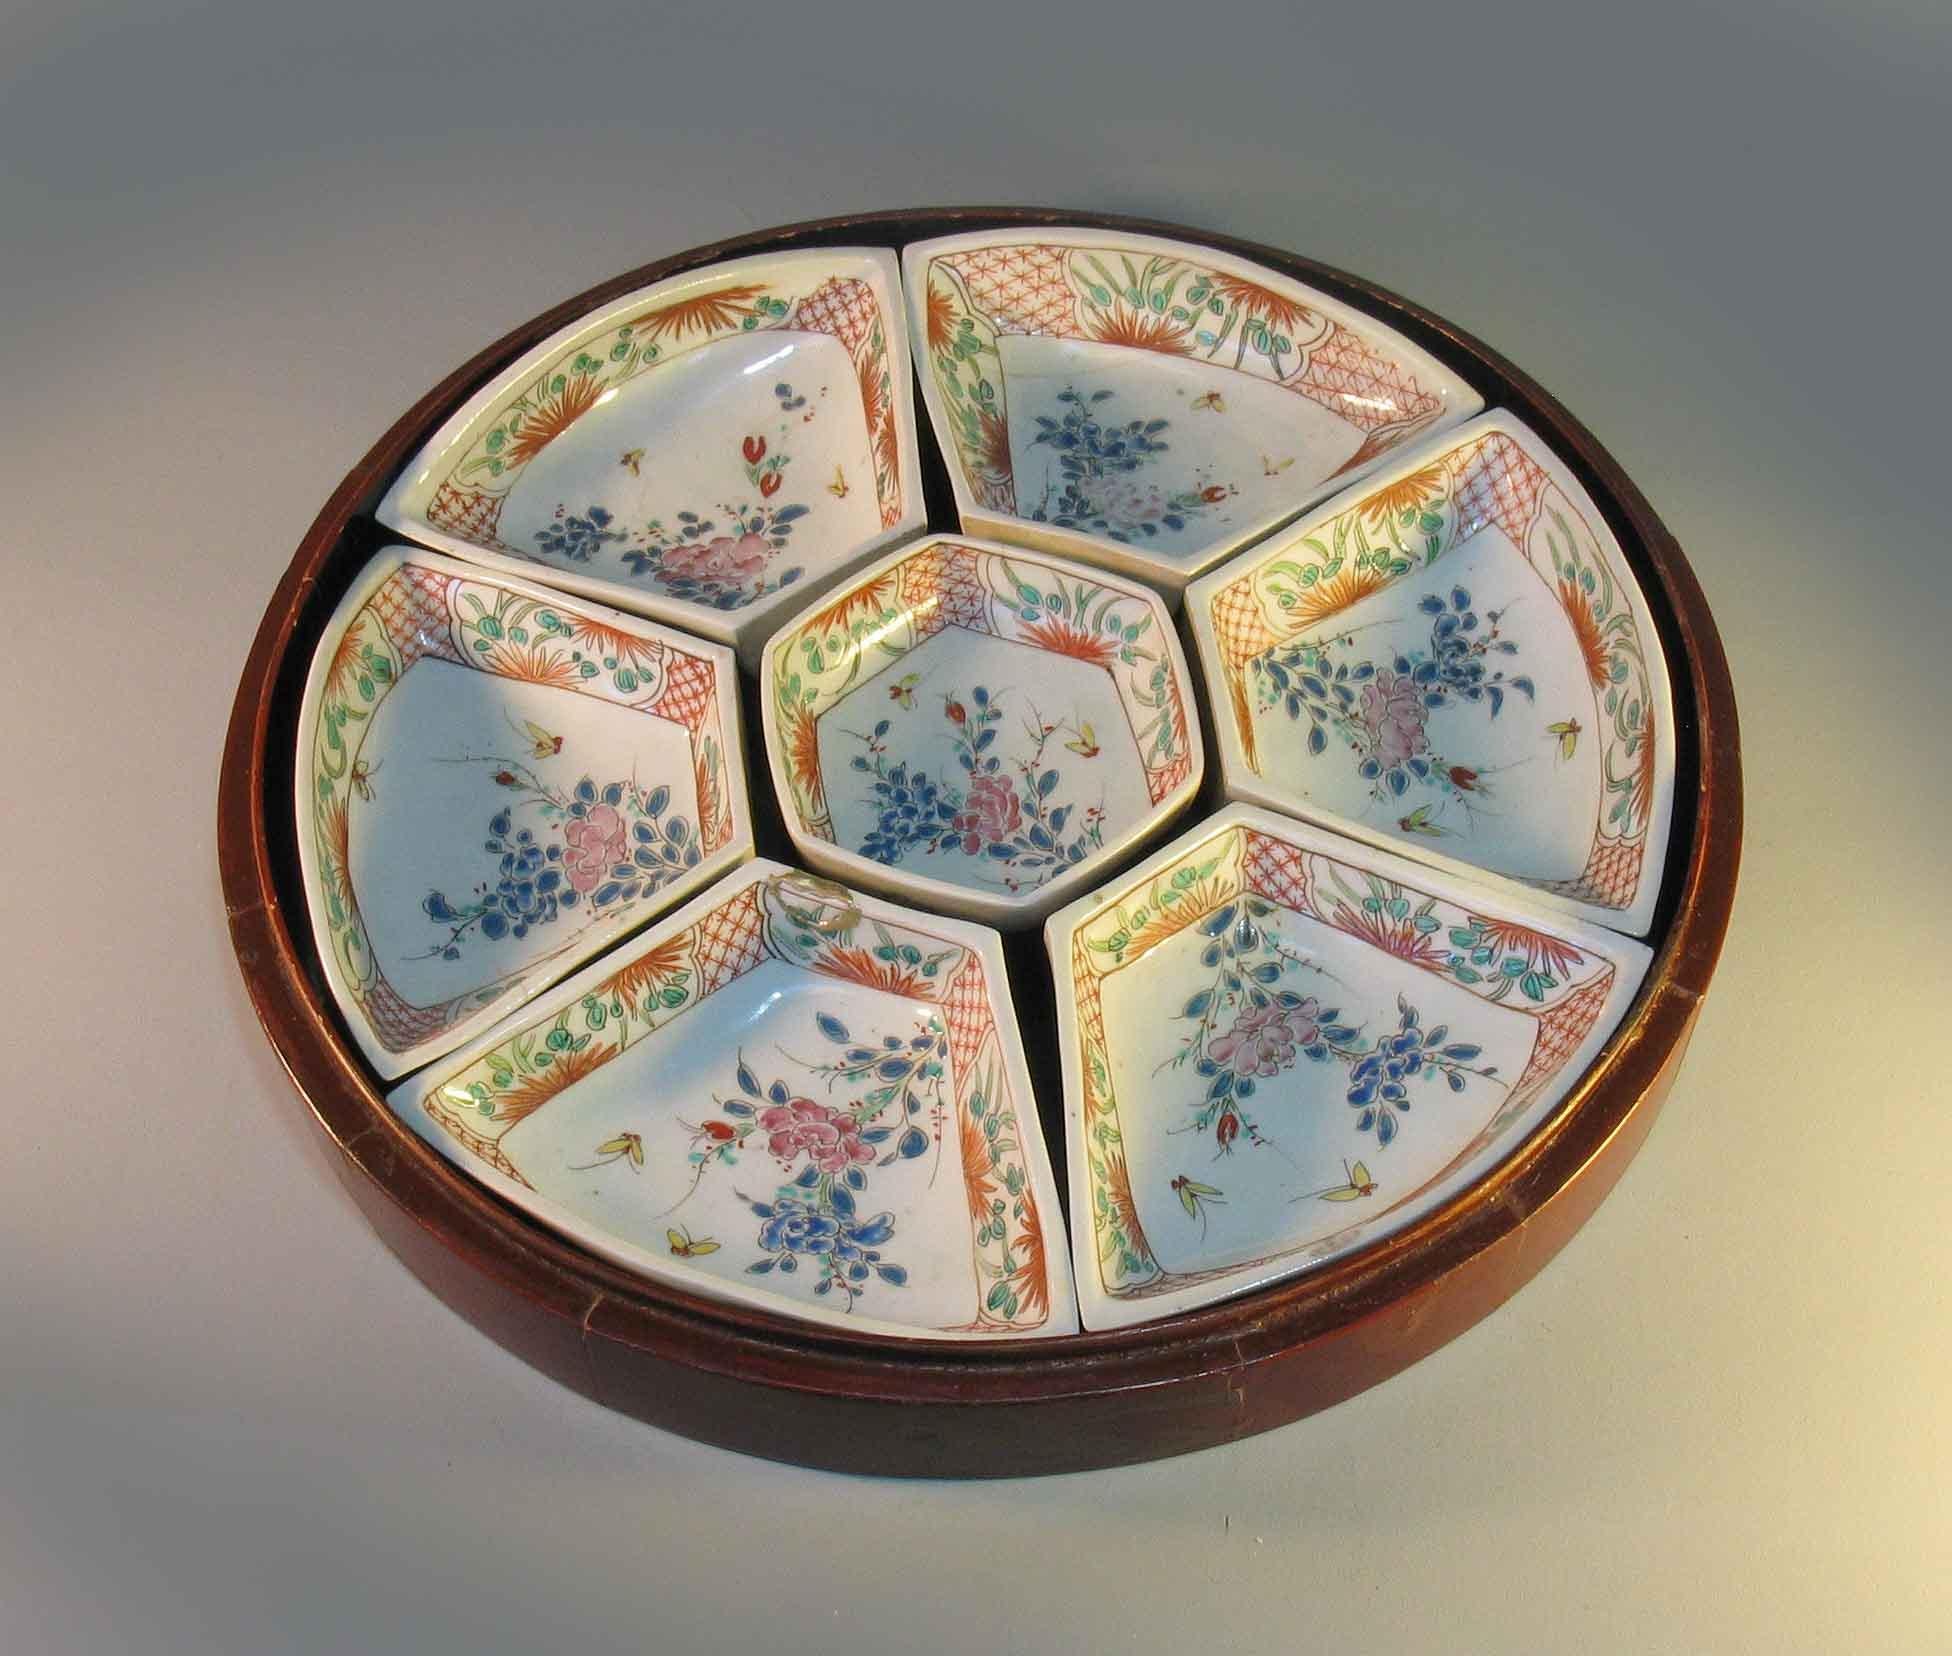 A seven-piece Japanese Arita Sweetmeat set and matching lacquer box, Meiji period (1880-1890). Comprising of a central hexagonal dish and six-fan shaped outer dishes, each painted in Kakiemon palette of iron-red, green, blue and black enamels with